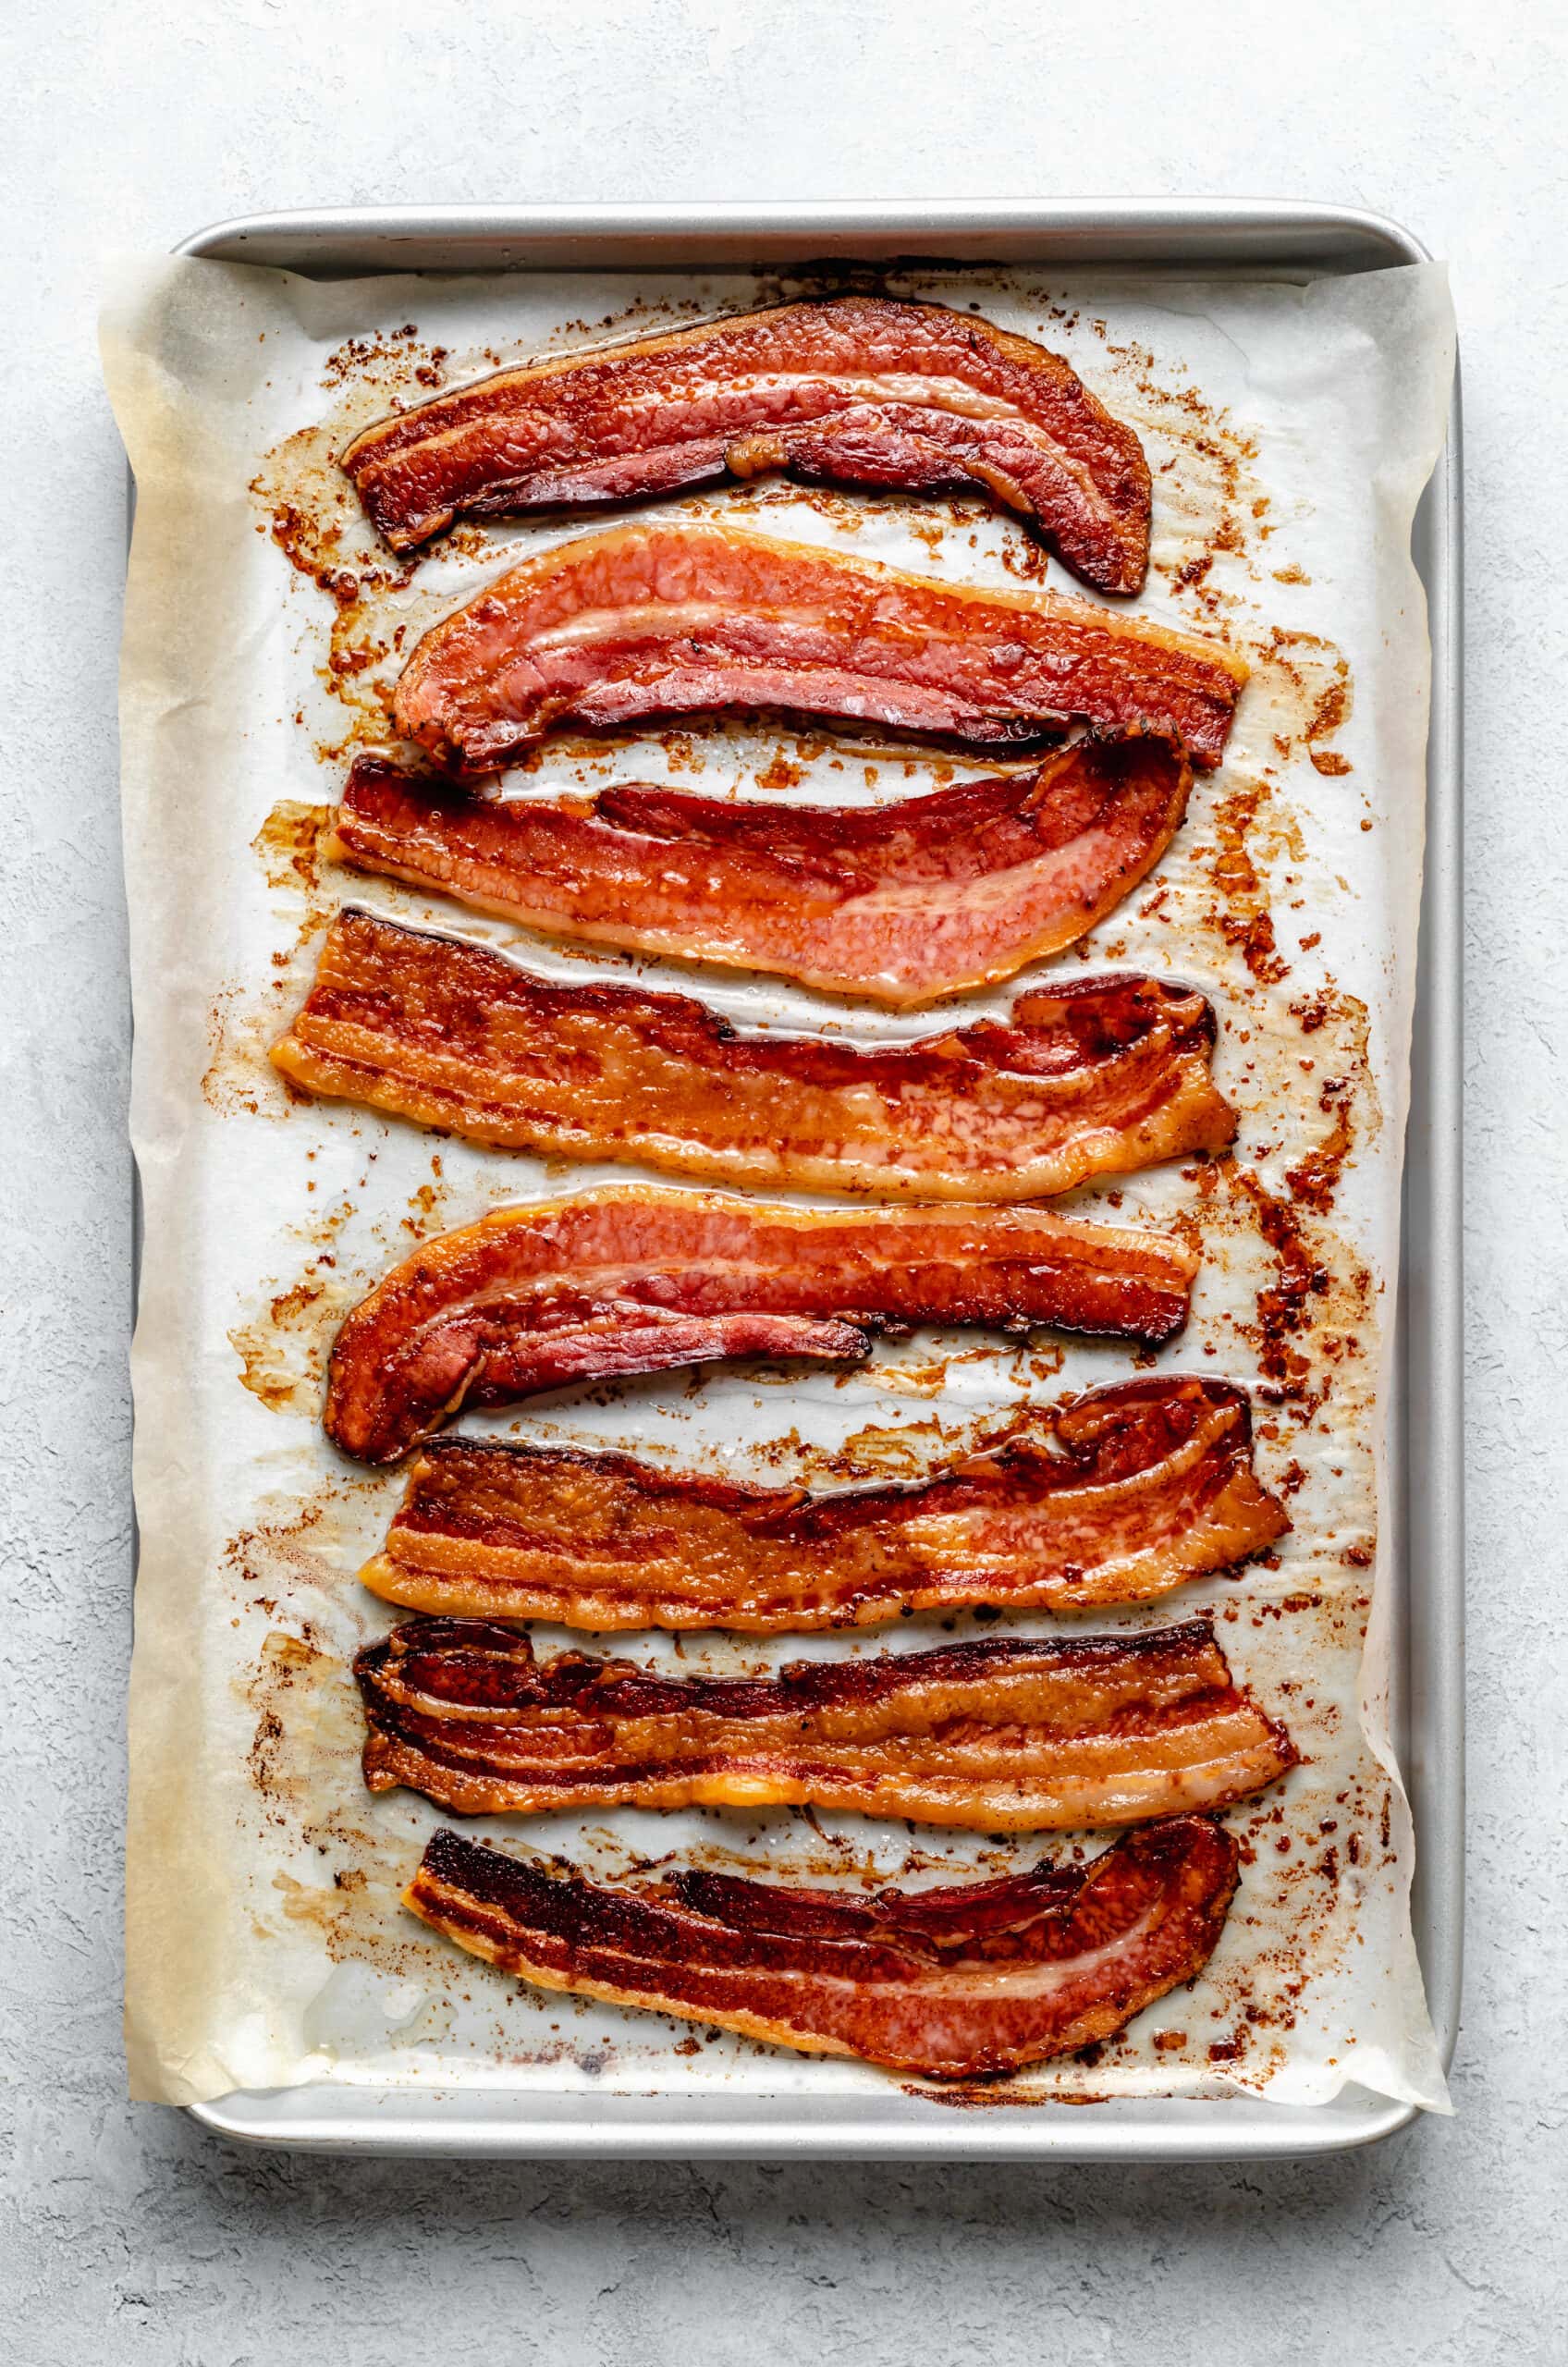 https://allthehealthythings.com/wp-content/uploads/2021/07/How-to-Bake-Bacon-in-the-Oven-3-scaled.jpg